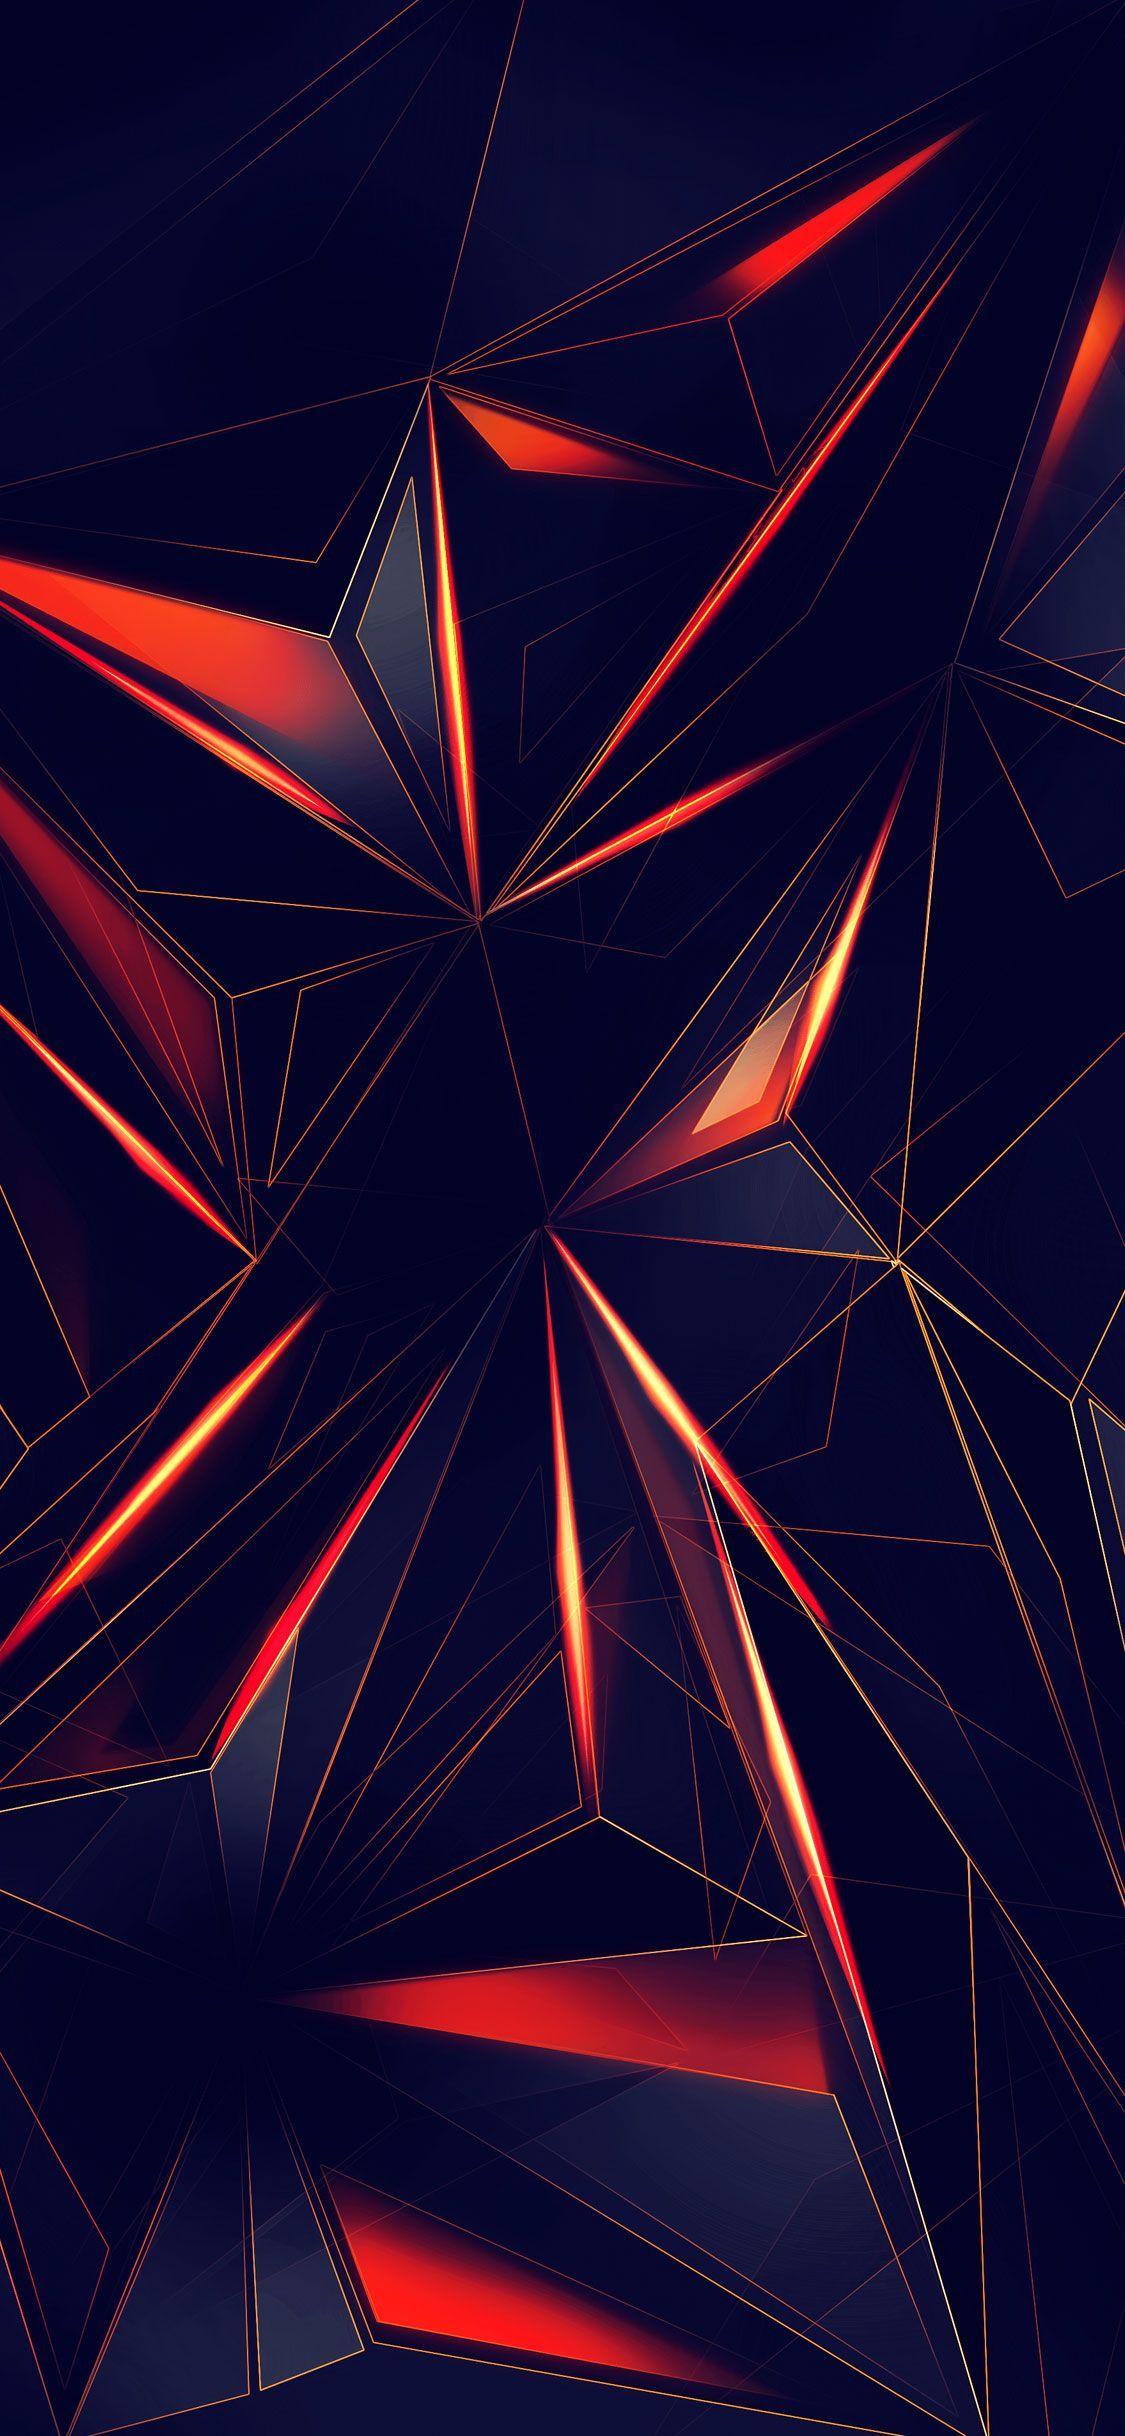 Free Abstract Iphone Wallpaper Downloads 300 Abstract Iphone Wallpapers  for FREE  Wallpaperscom